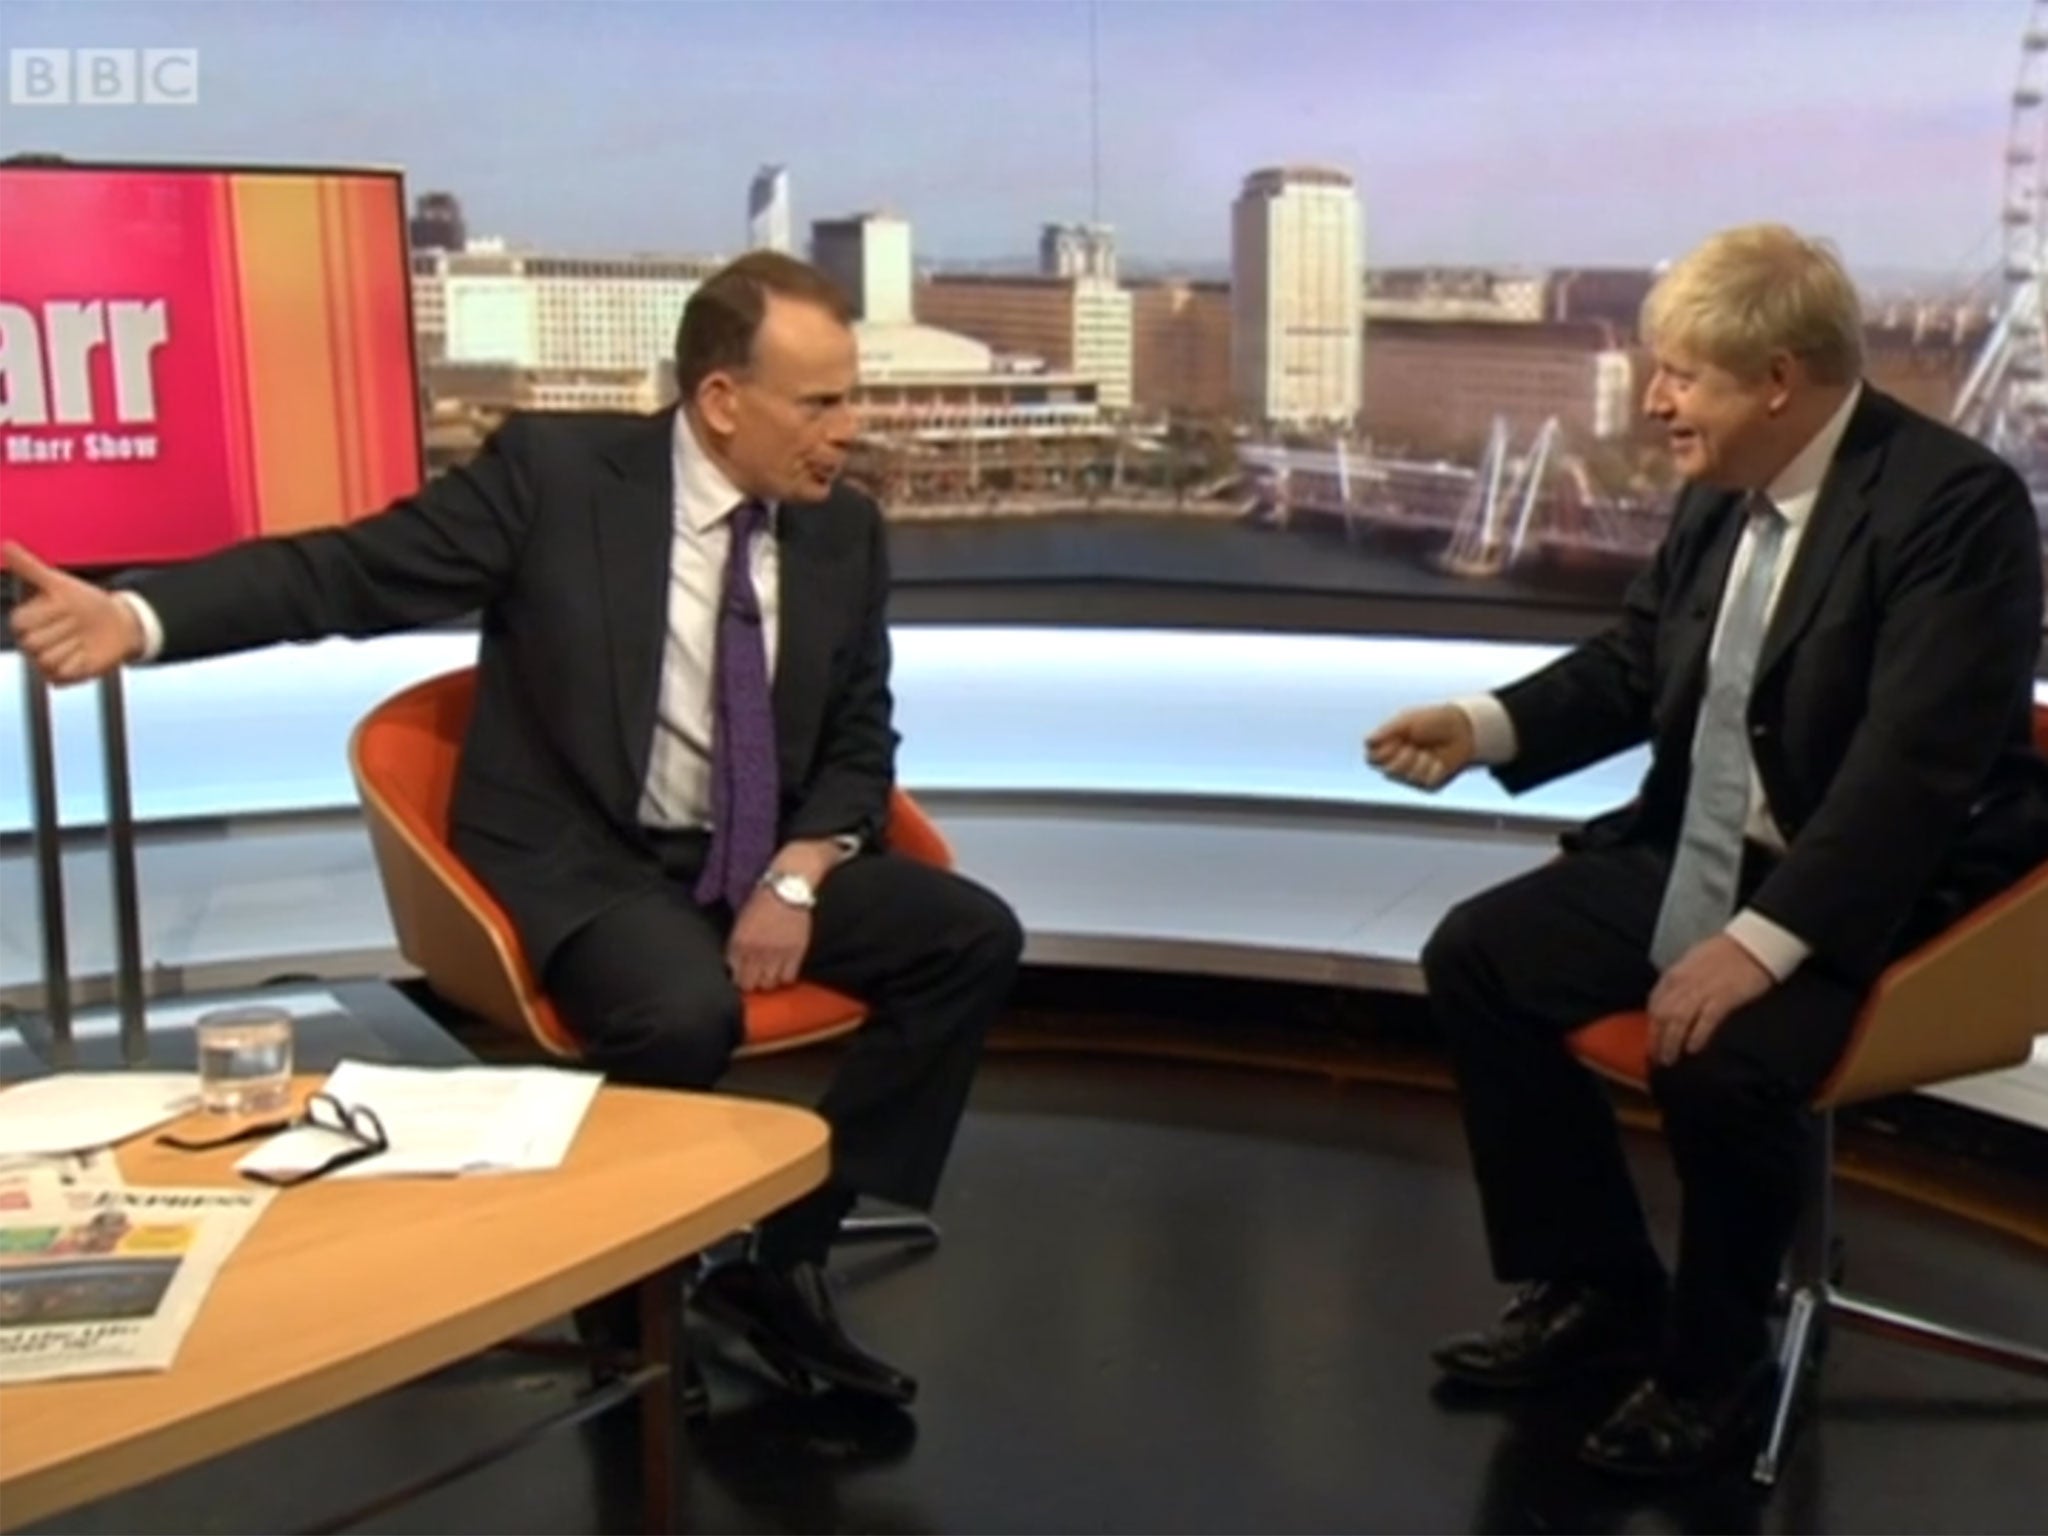 Boris Johnson and Andrew Marr in a heated debate on the Andrew Marr Show, Sunday 6 March 2016